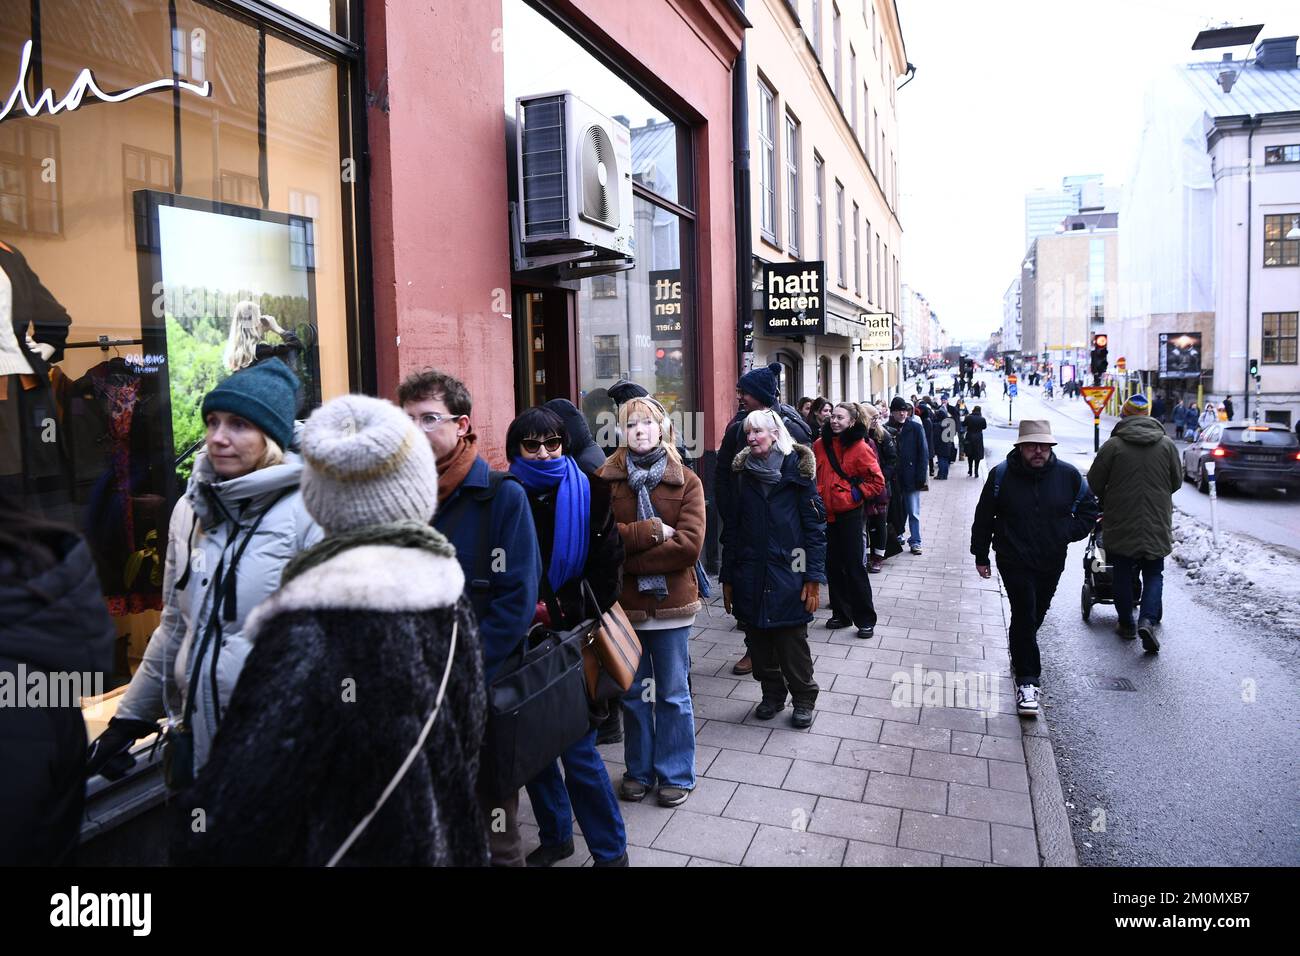 Stockholm, Sweden, 07/12/2022, A long queue outside Soderbokhandeln bookshop where French author Annie Ernaux, winner of the Nobel Prize for Literature, was signing books, in Stockholm Sweden, December 7, 2022. Photo: Tim Aro / TT / code 12130 Credit: TT News Agency/Alamy Live News Stock Photo